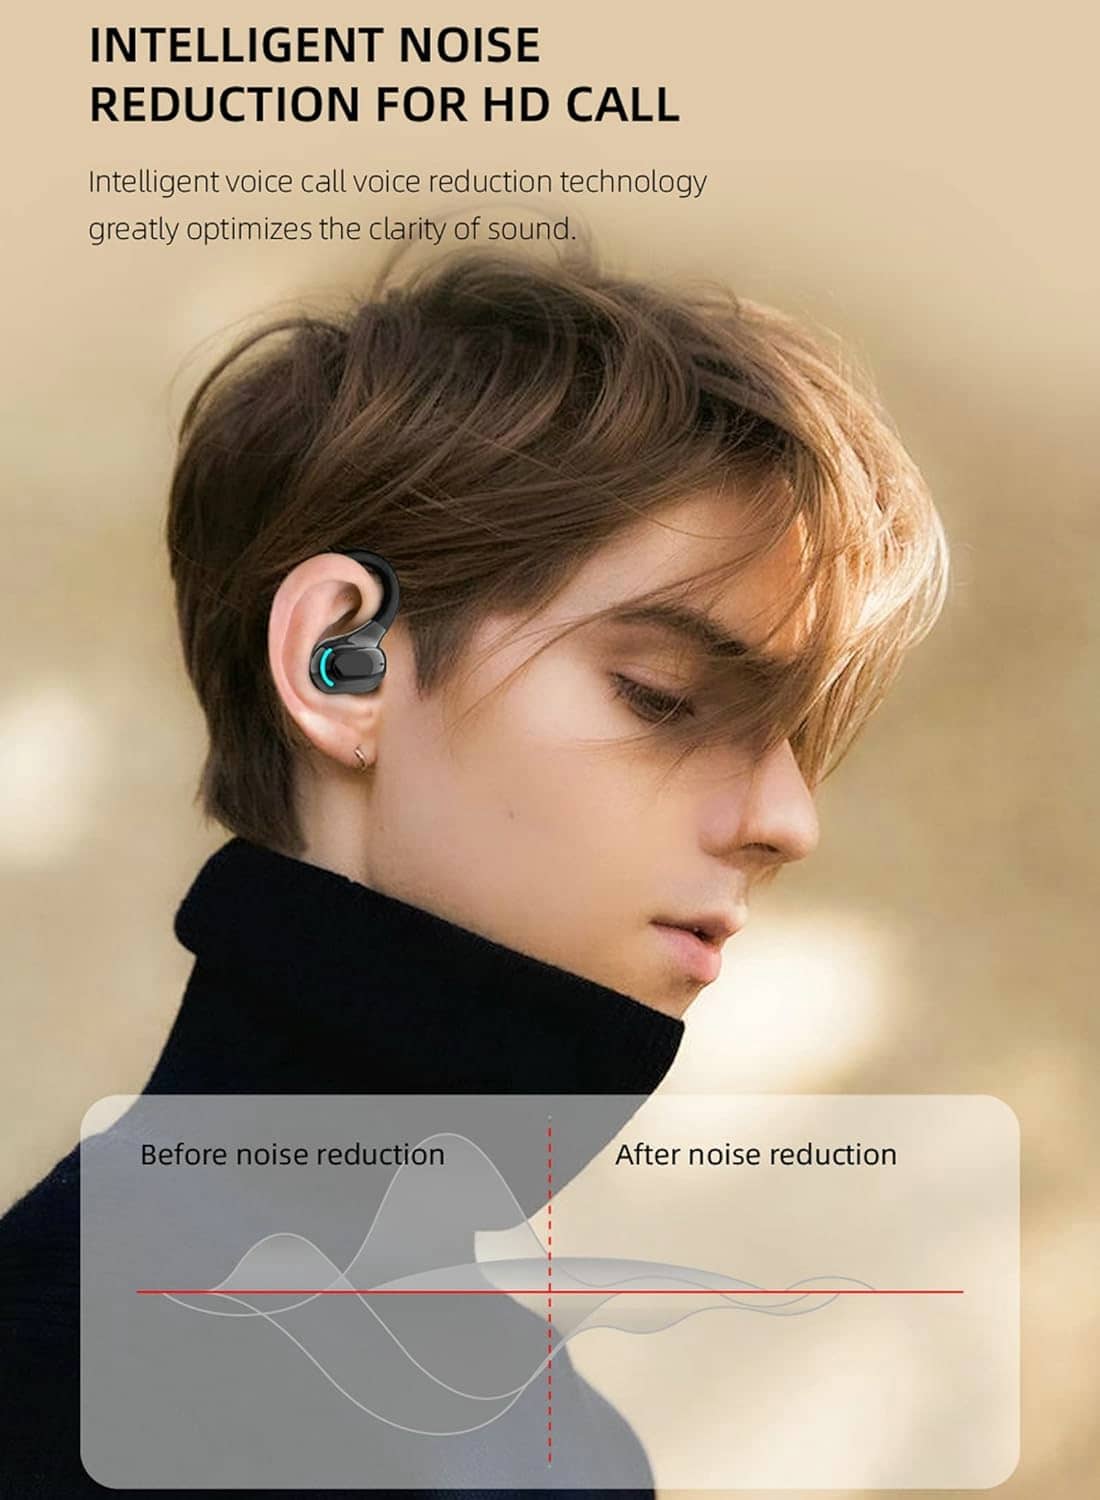 Wireless Earbuds with Earhooks Single Bluetooth Earpiece Sports Headphones Over the Ear Running Workout Wrap Around Earbuds 20H Long Battery Life Waterproof Noise Cancelling Headset for Android iOS